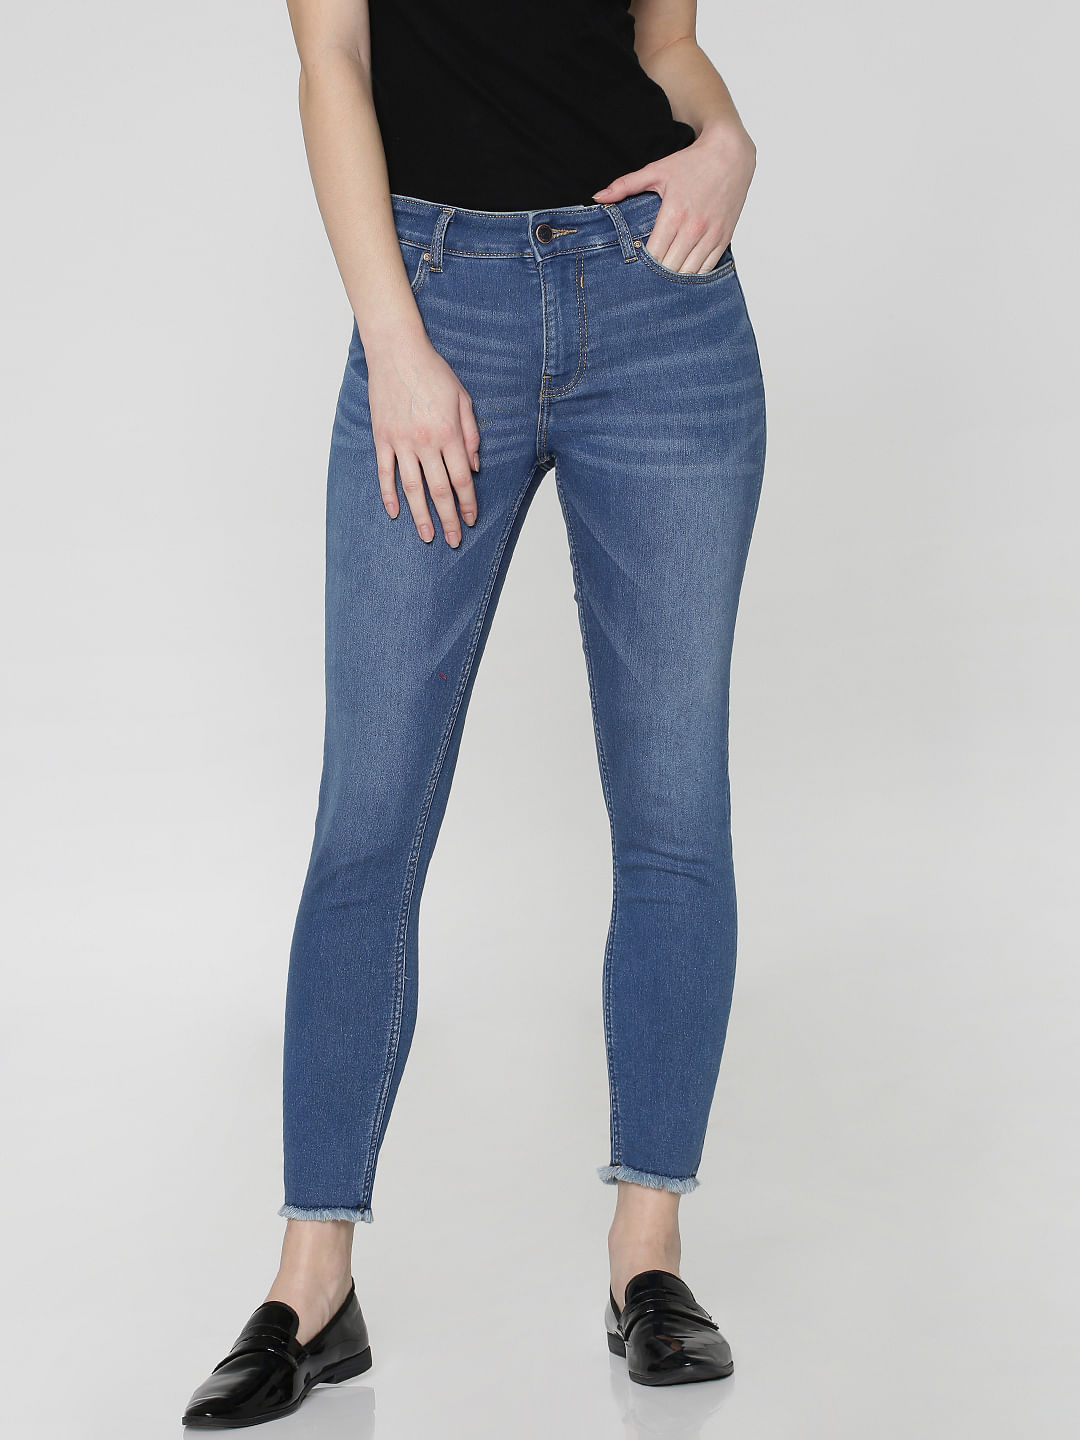 ankle blue jeans